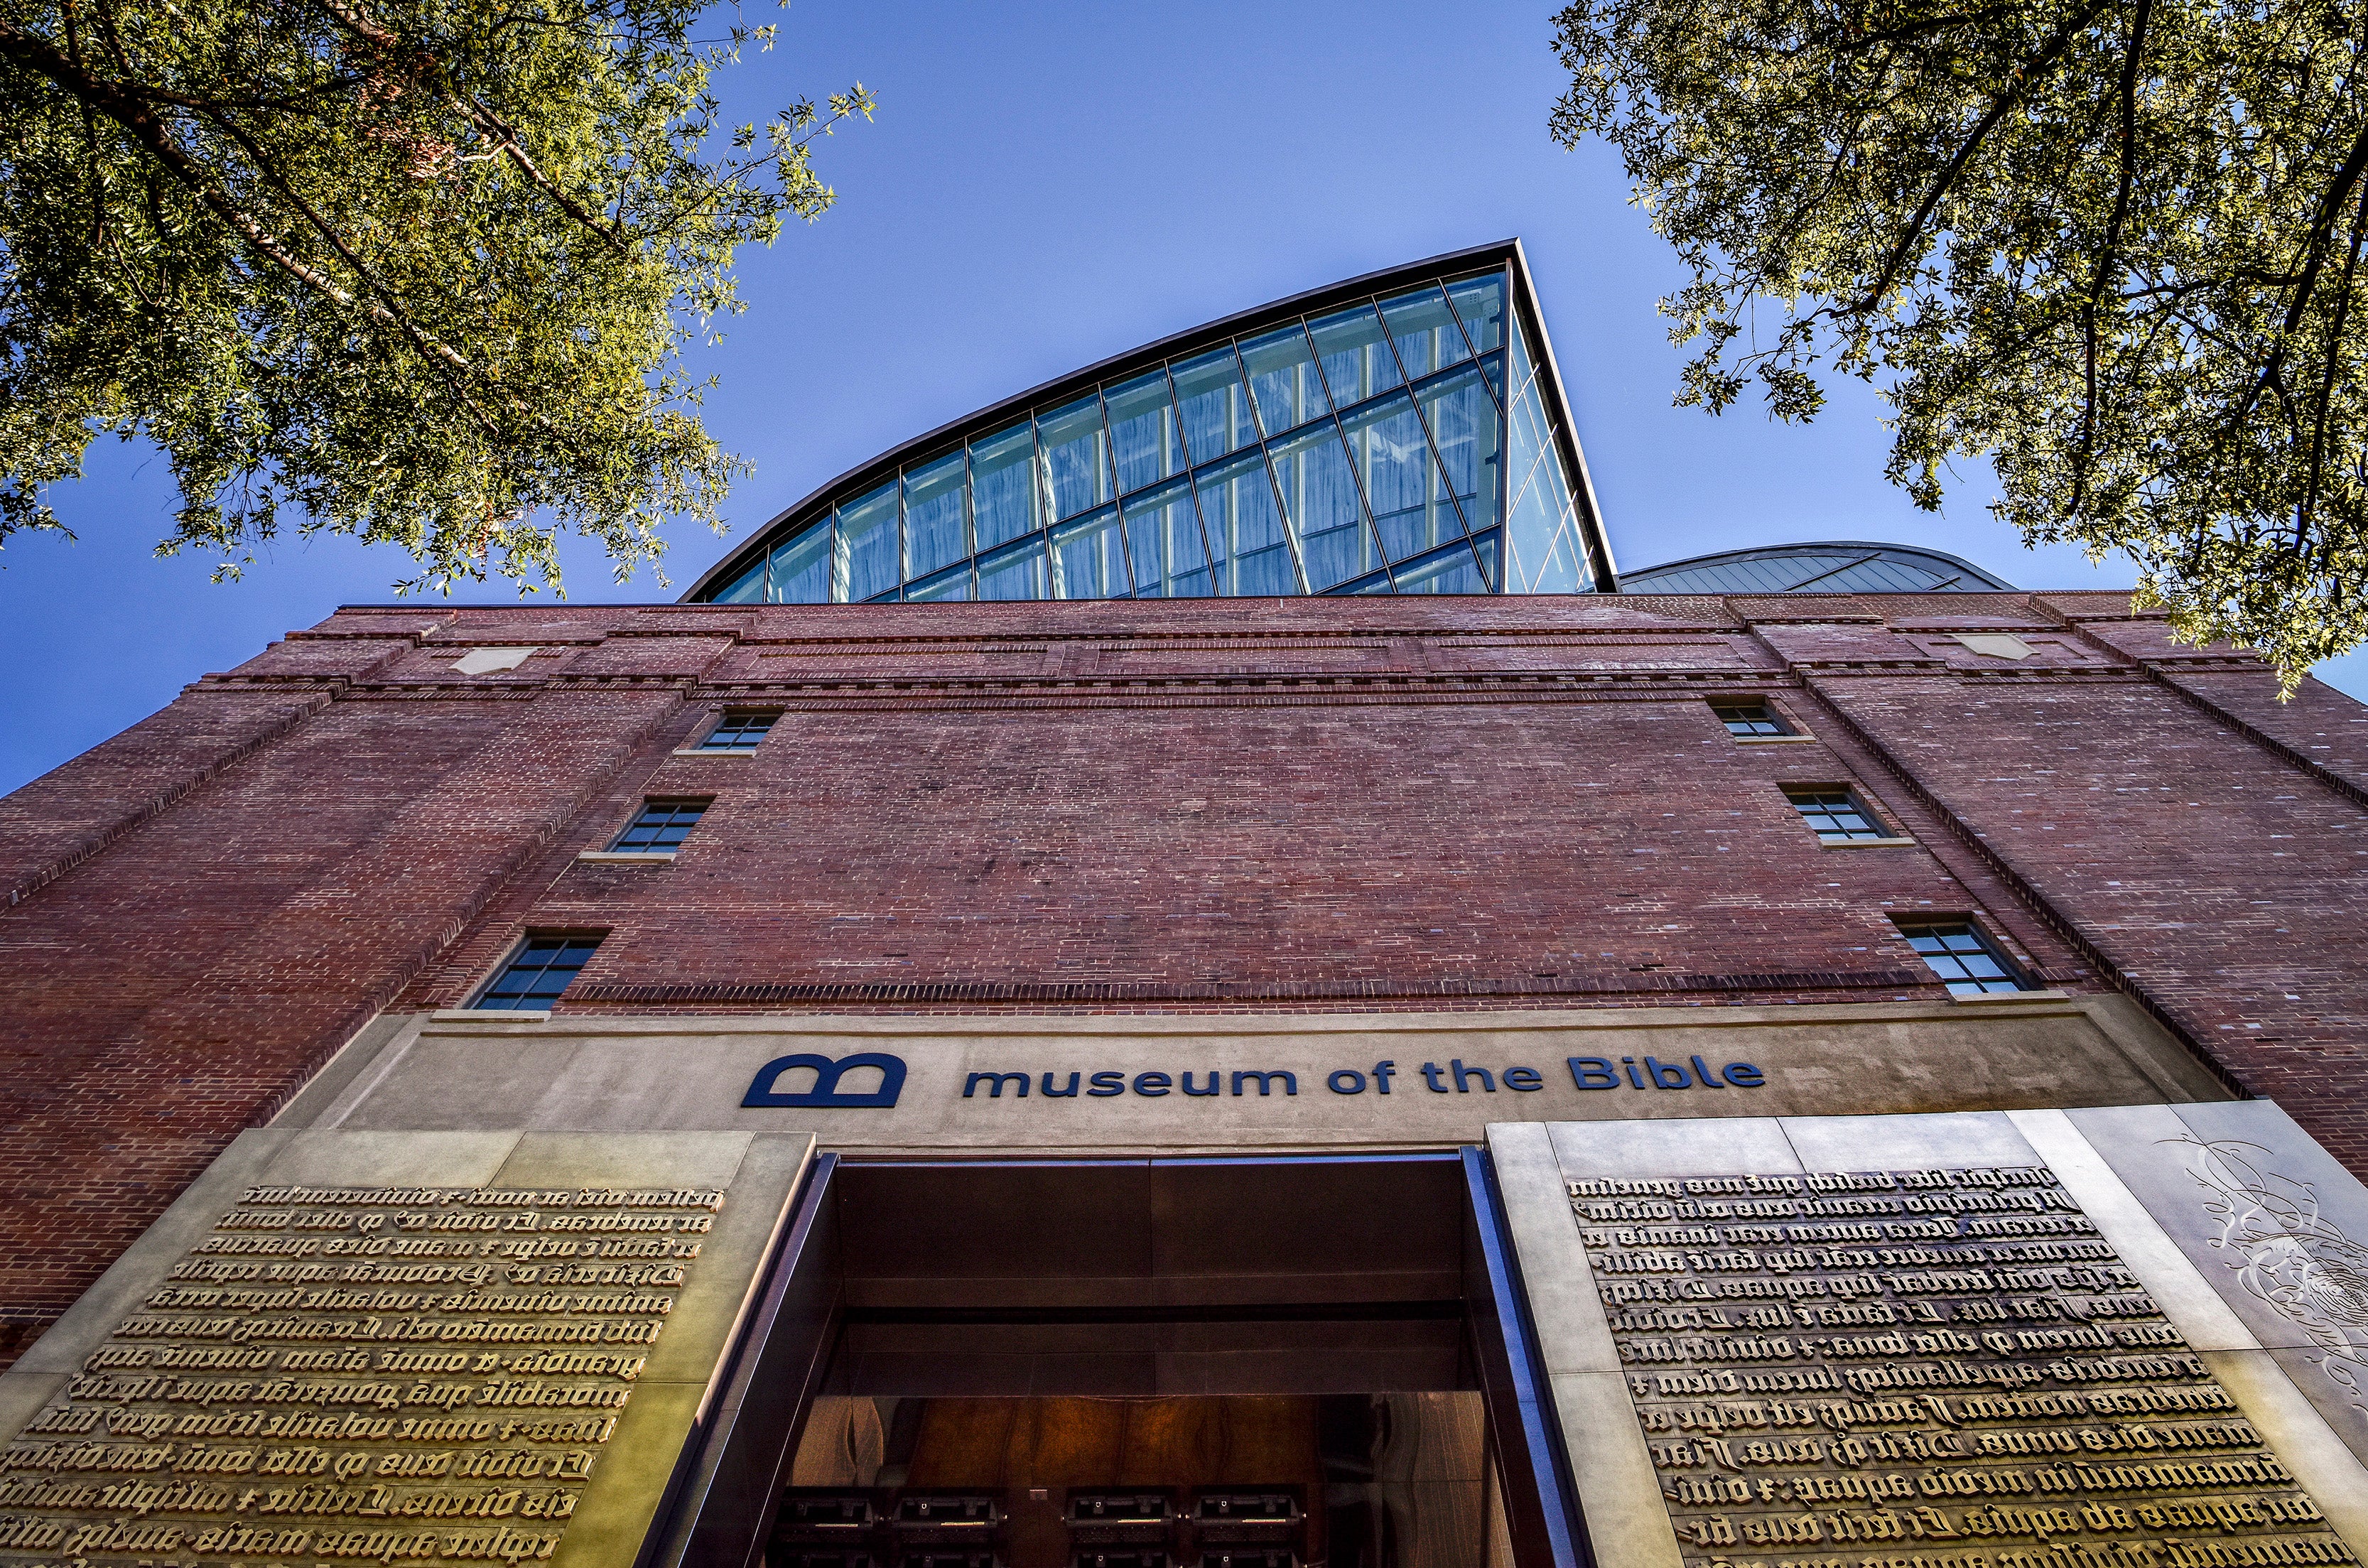 The Museum of the Bible in Washington, where the tablet was displayed